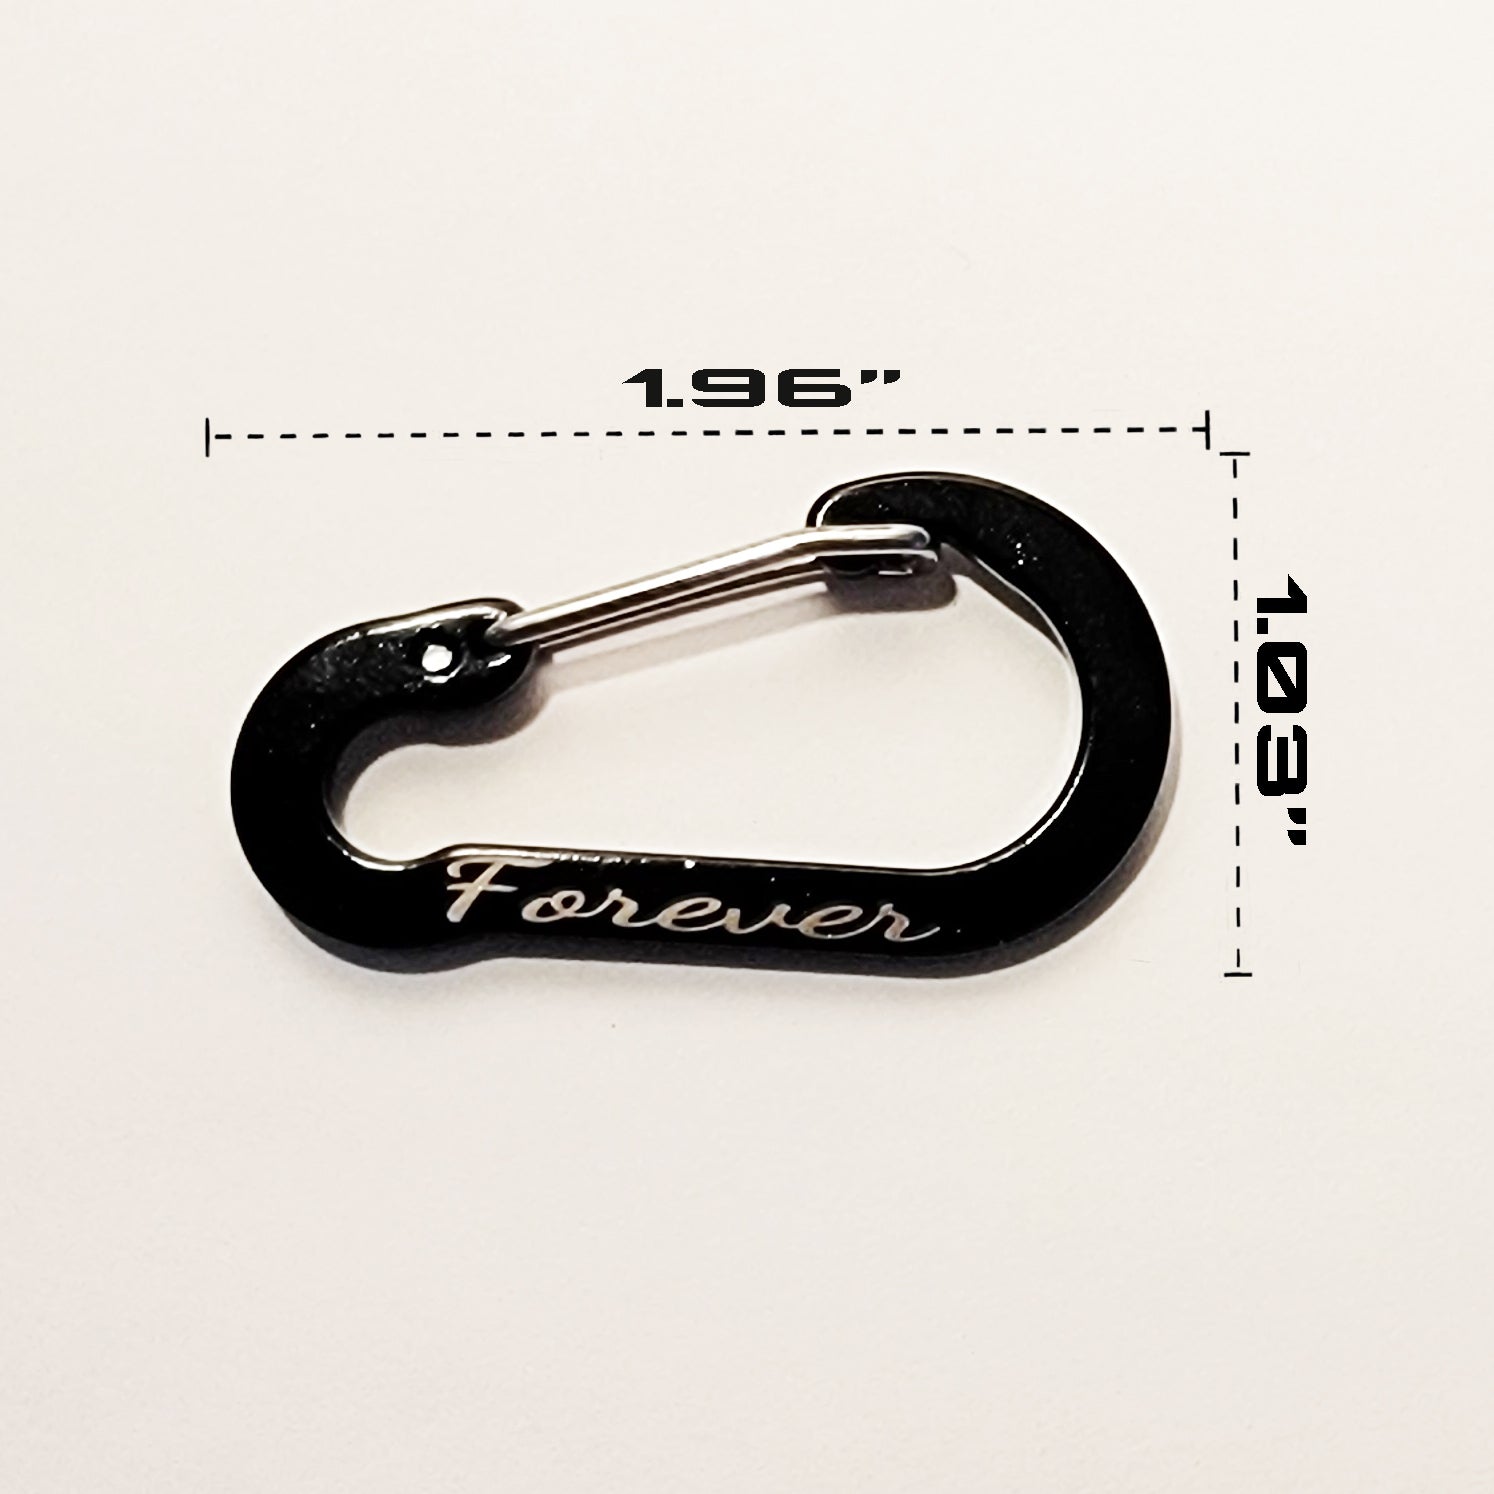 ThinkEngraved Custom Keychain Personalized Engraved Carabiner Key Pear Shaped With Snap Hook - Engraved Handwriting Carabiner